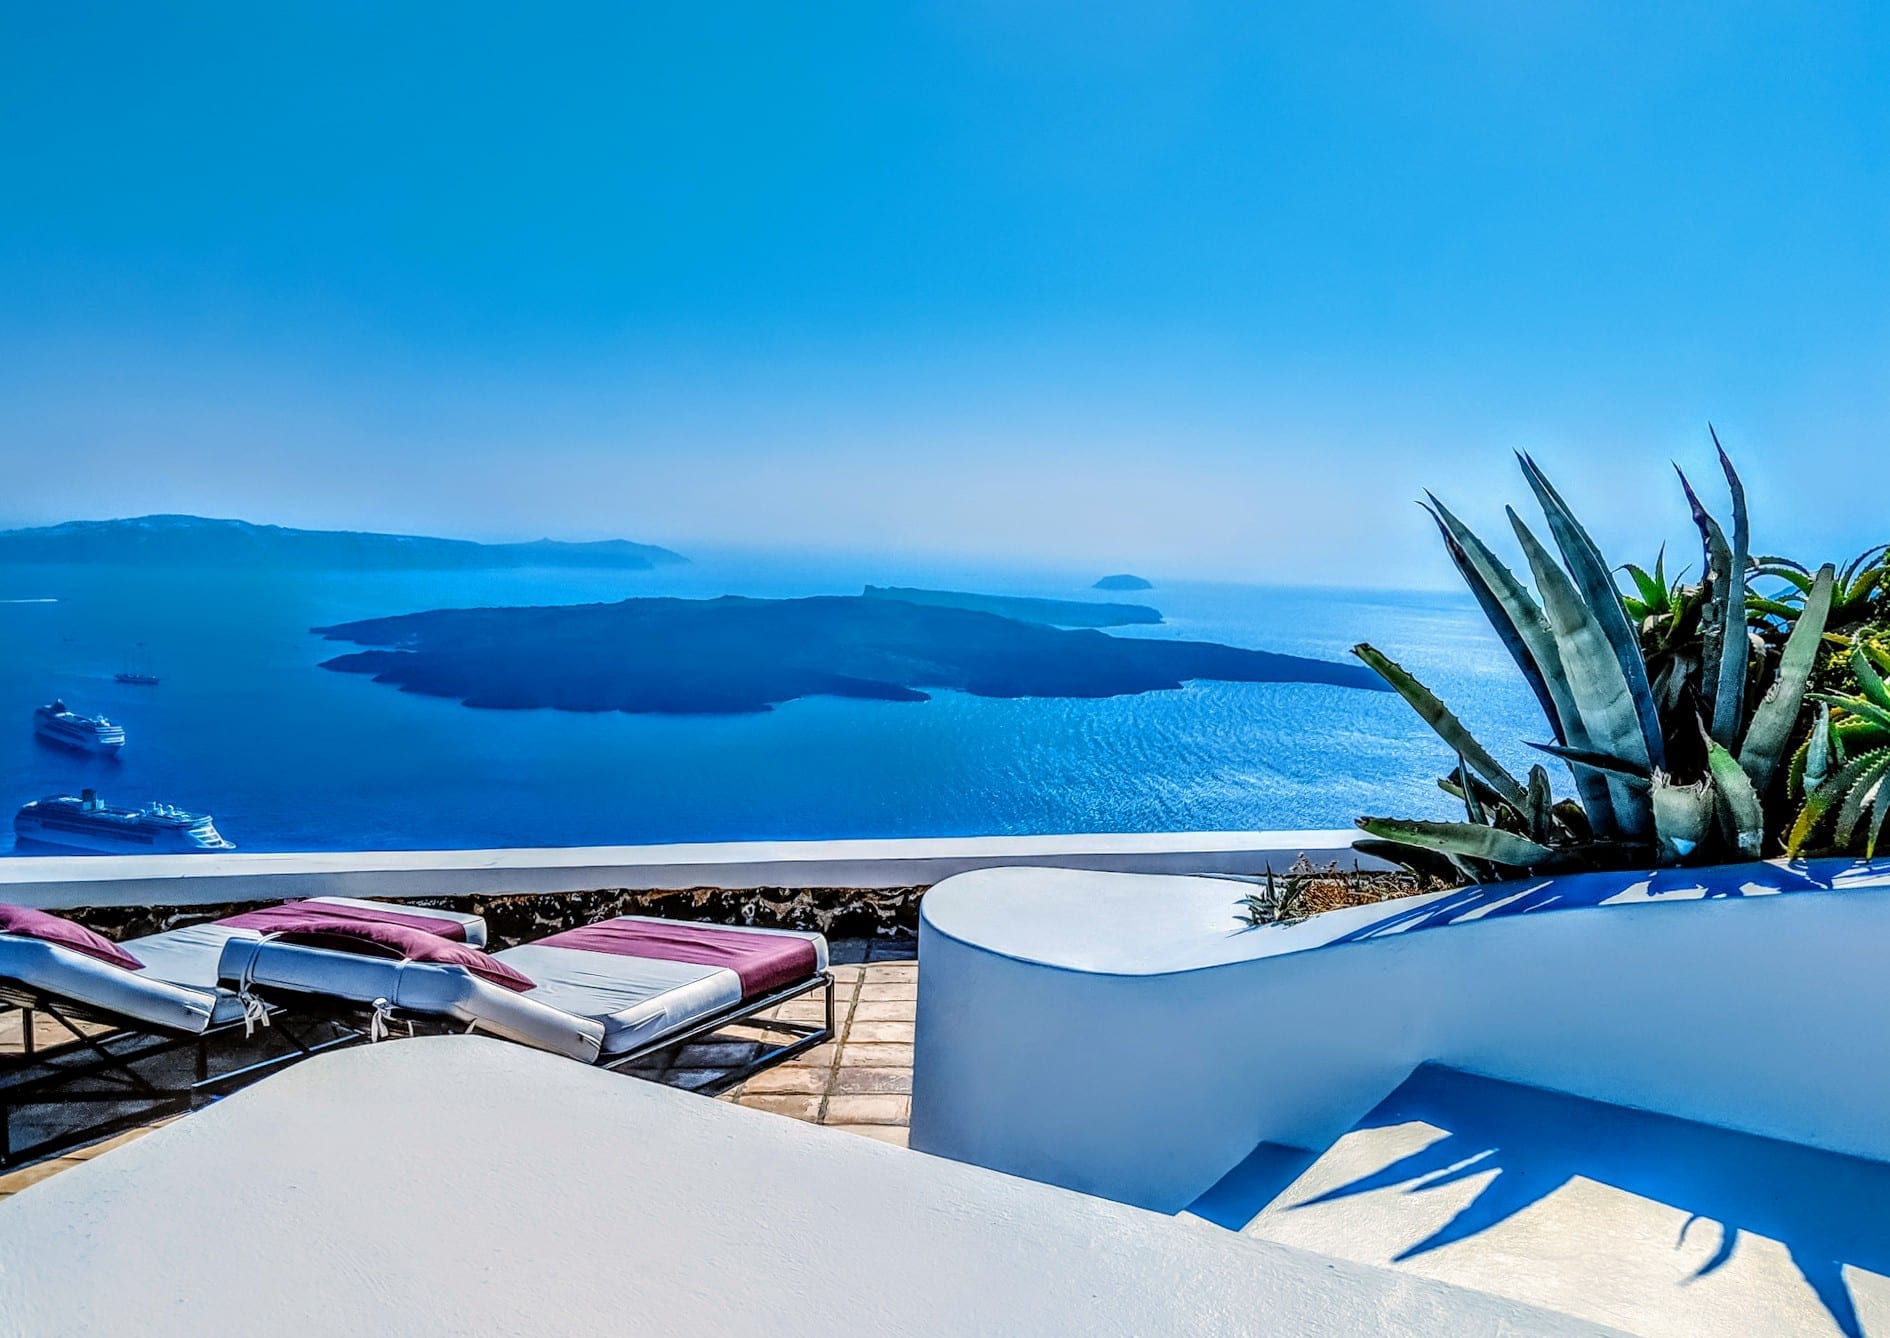 Santorini: Your 48 Hour Guide To Stunning Hotels, Food & Secret Beaches